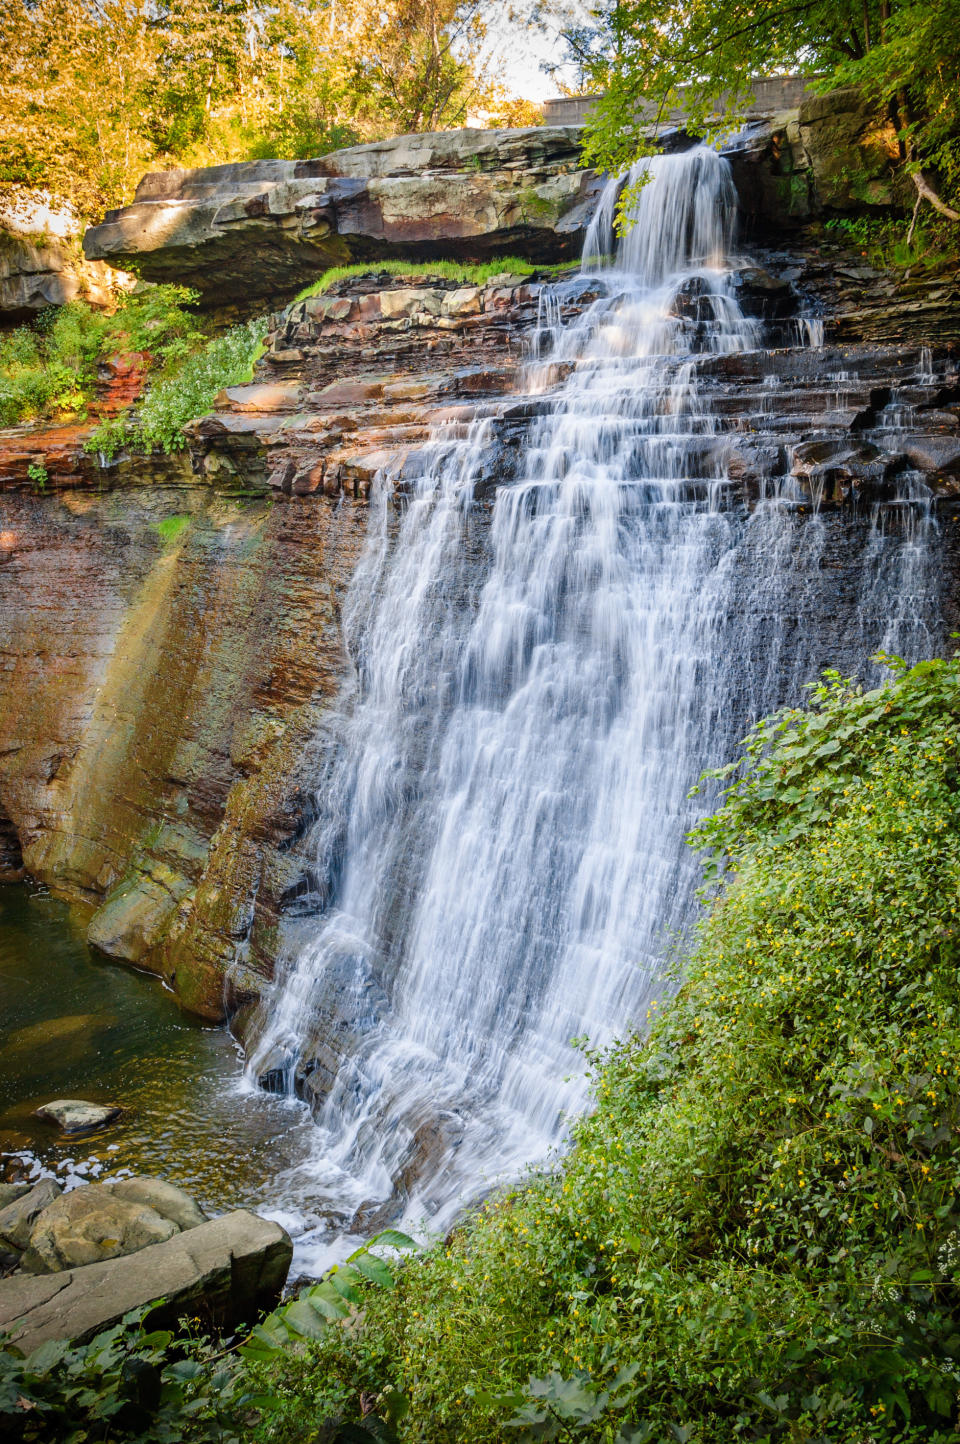 A tall waterfall rushes over a worn out rock formation, made up of flat layers of various thickness. Lush bushes and leaves surround the waterfall.